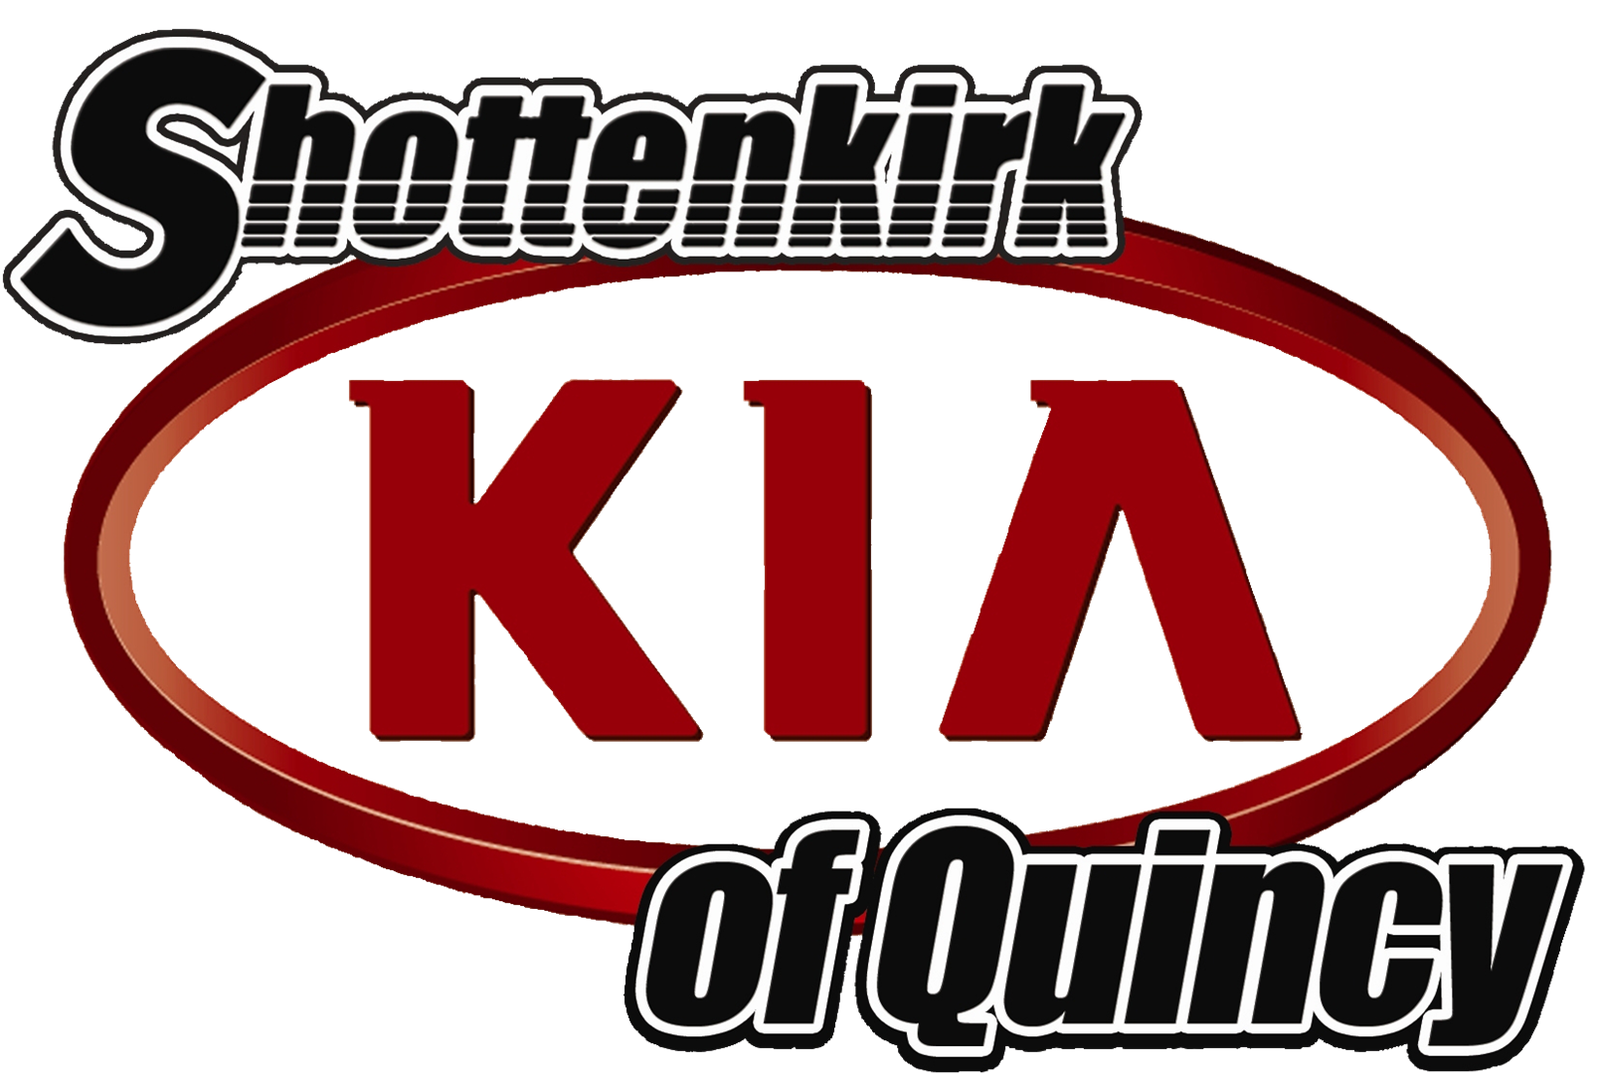 Shottenkirk Kia of Quincy - Quincy, IL: Read Consumer reviews, Browse